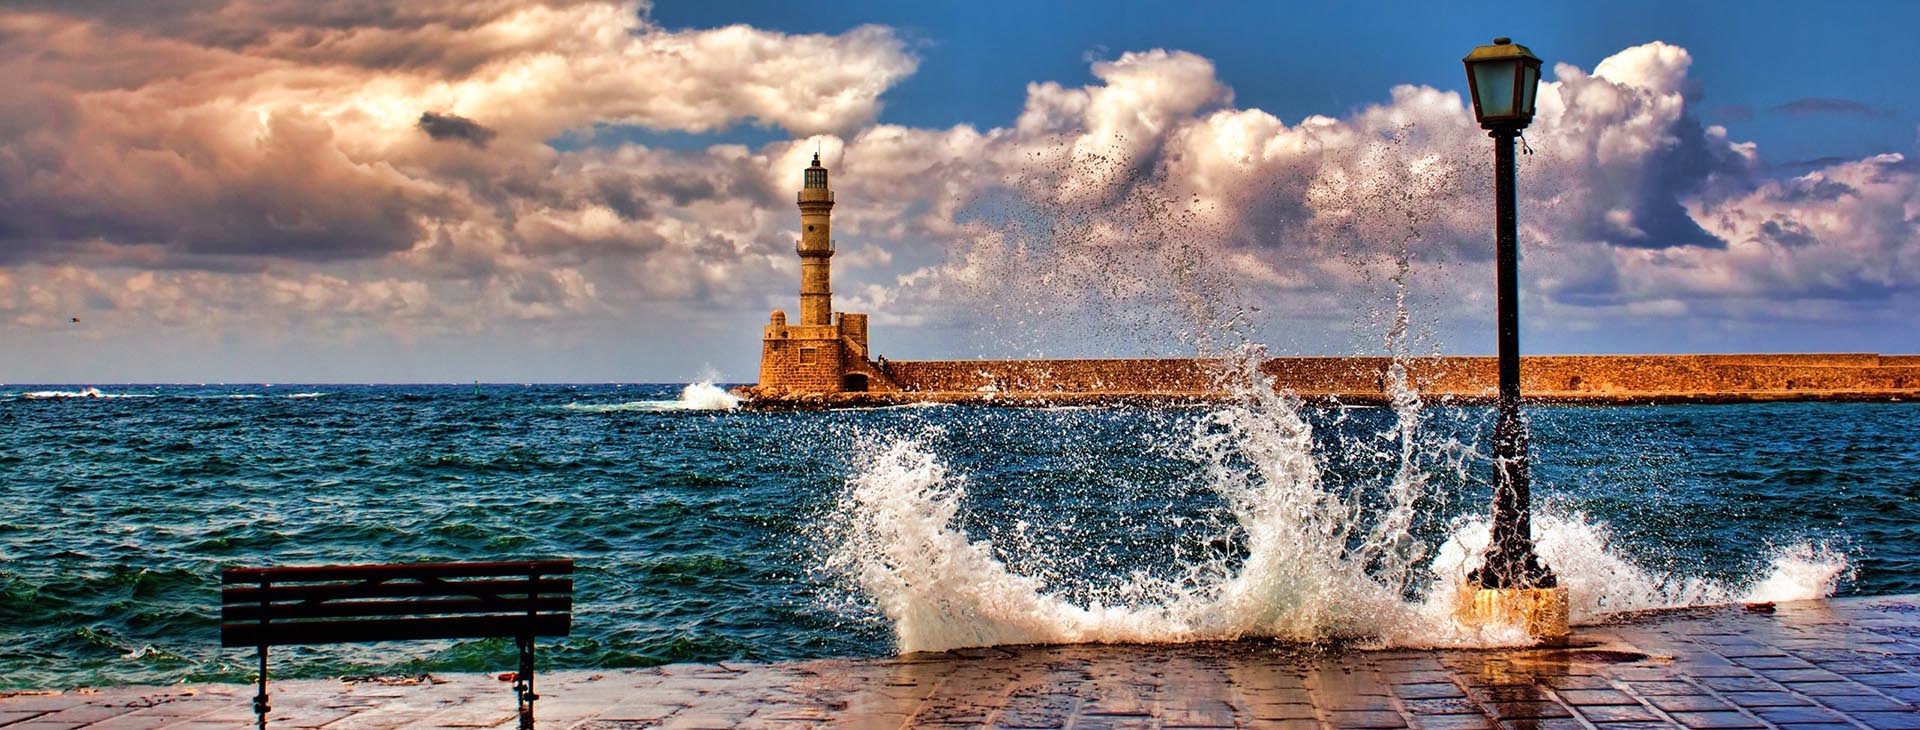 Town of Chania: The old harbour